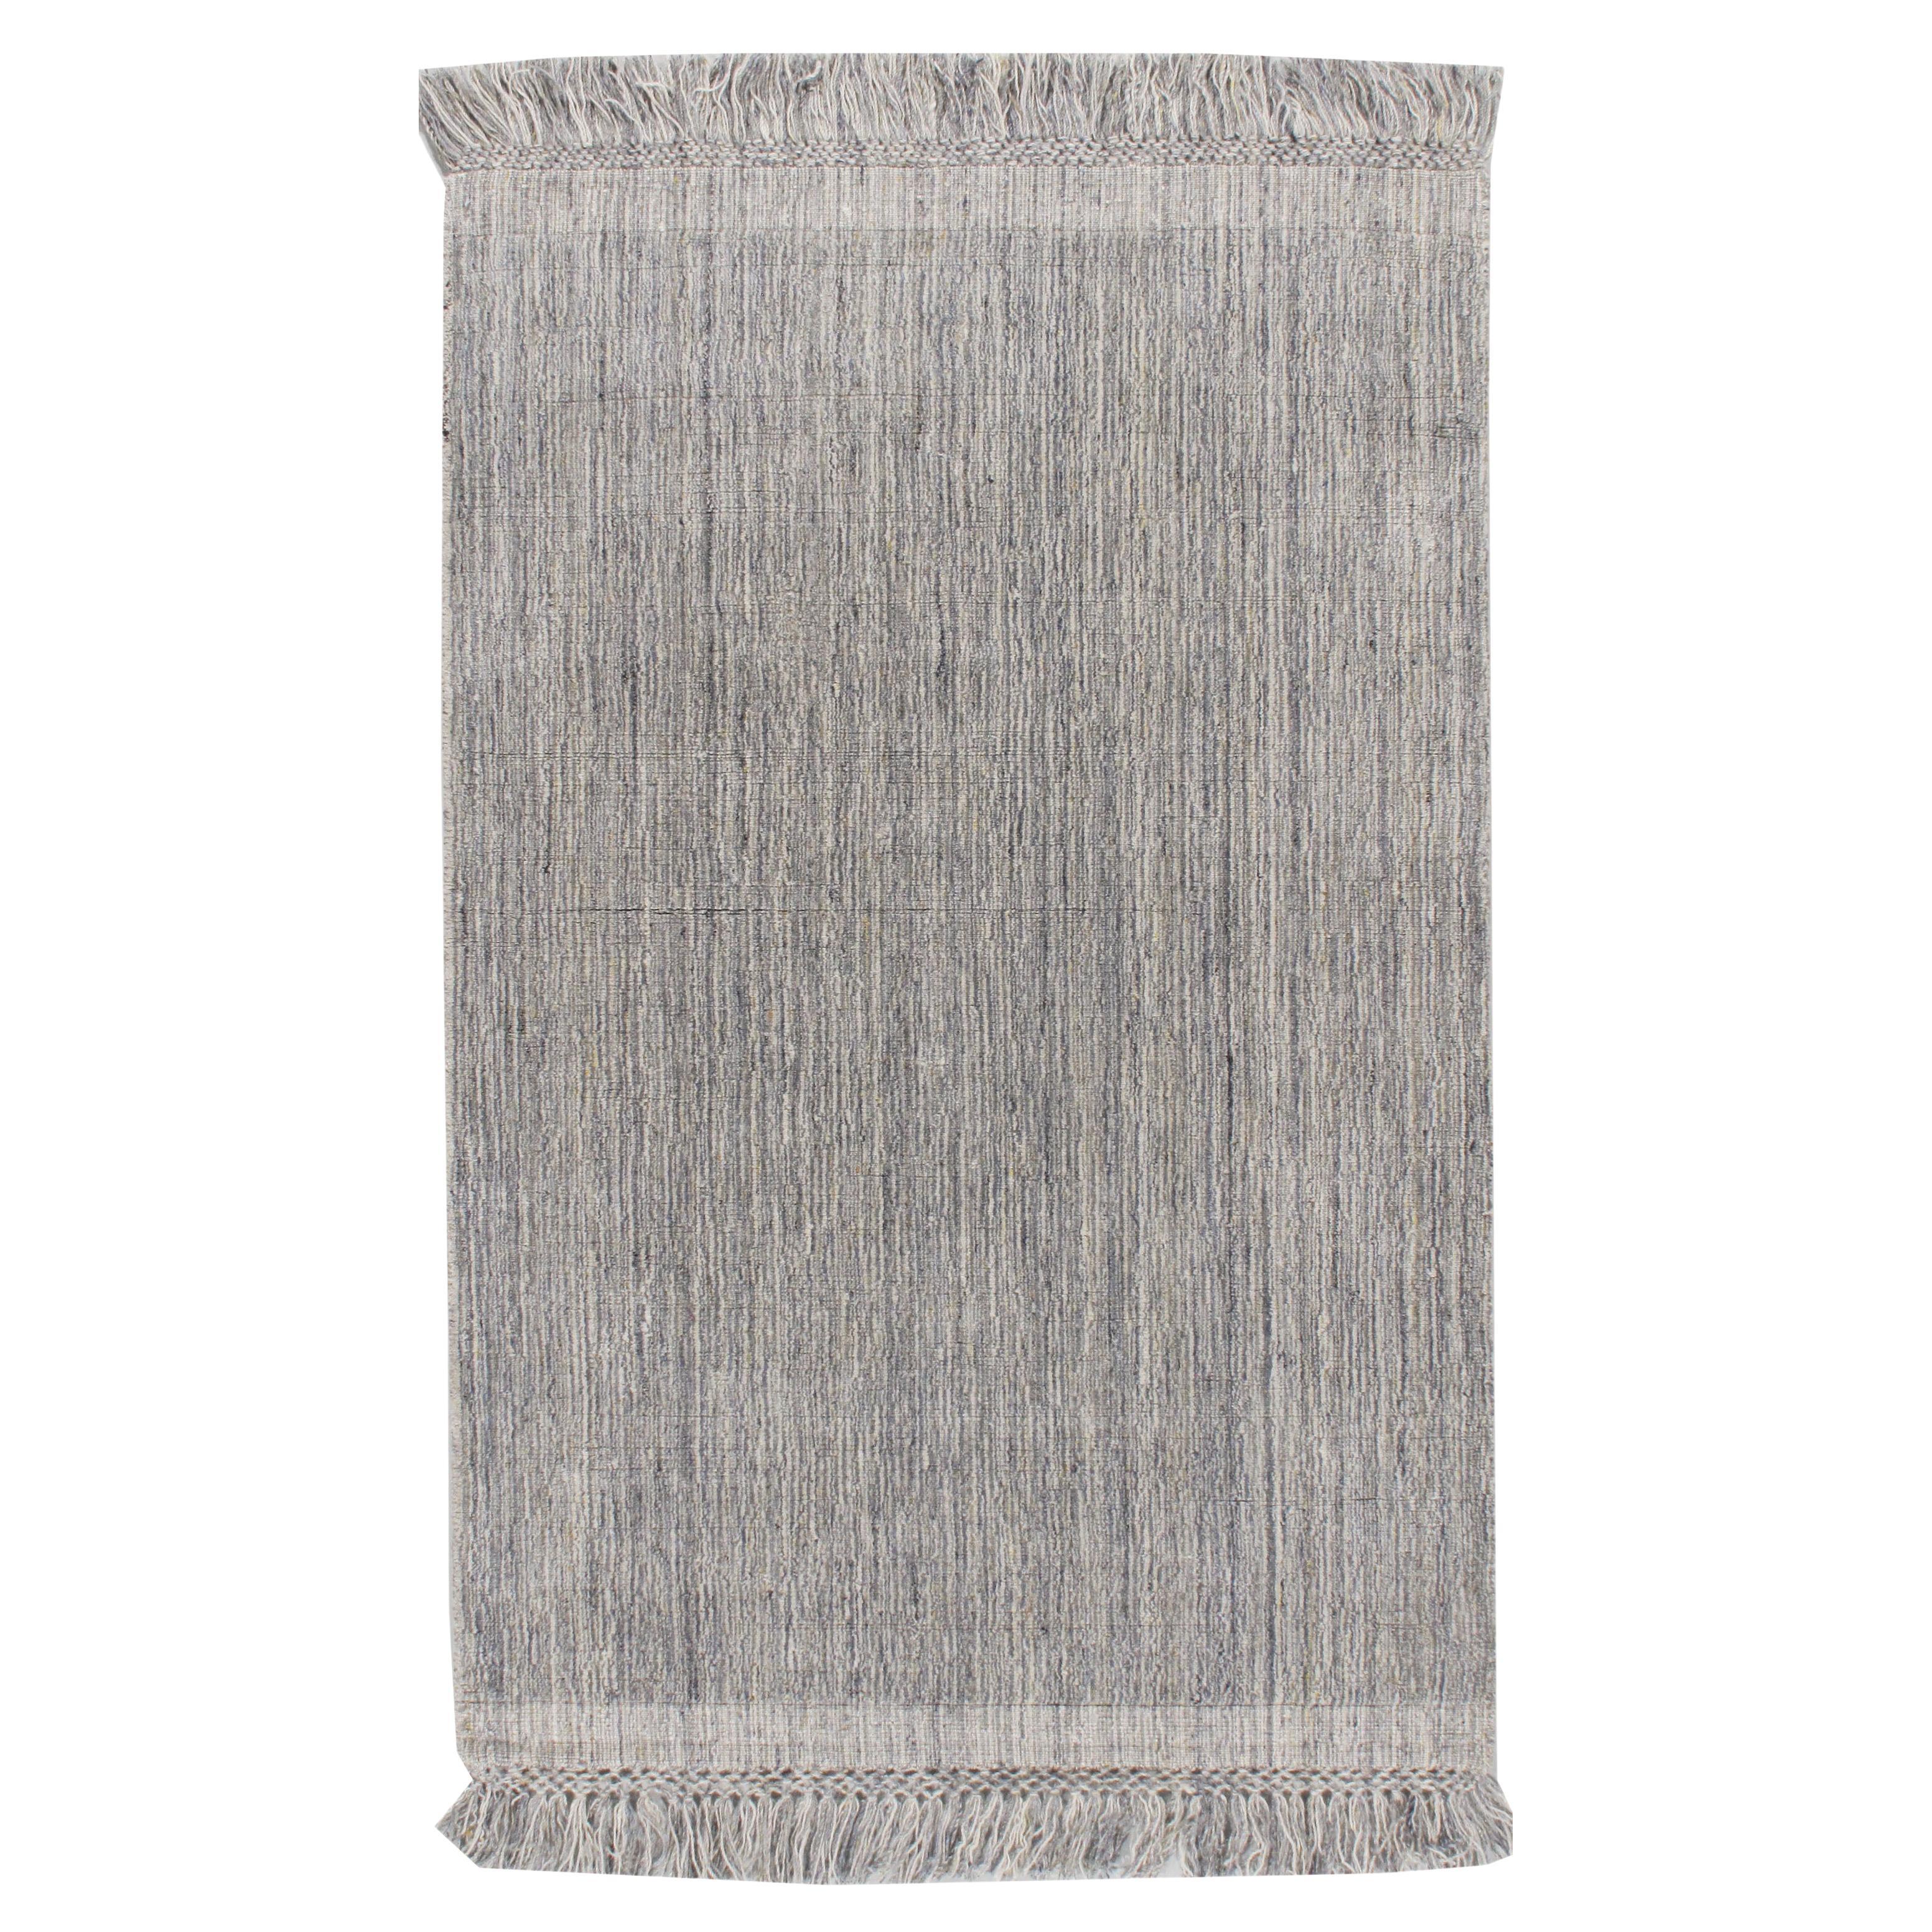 Contemporary Omni Rug Silver Charcoal Ivory  4' x 6' For Sale